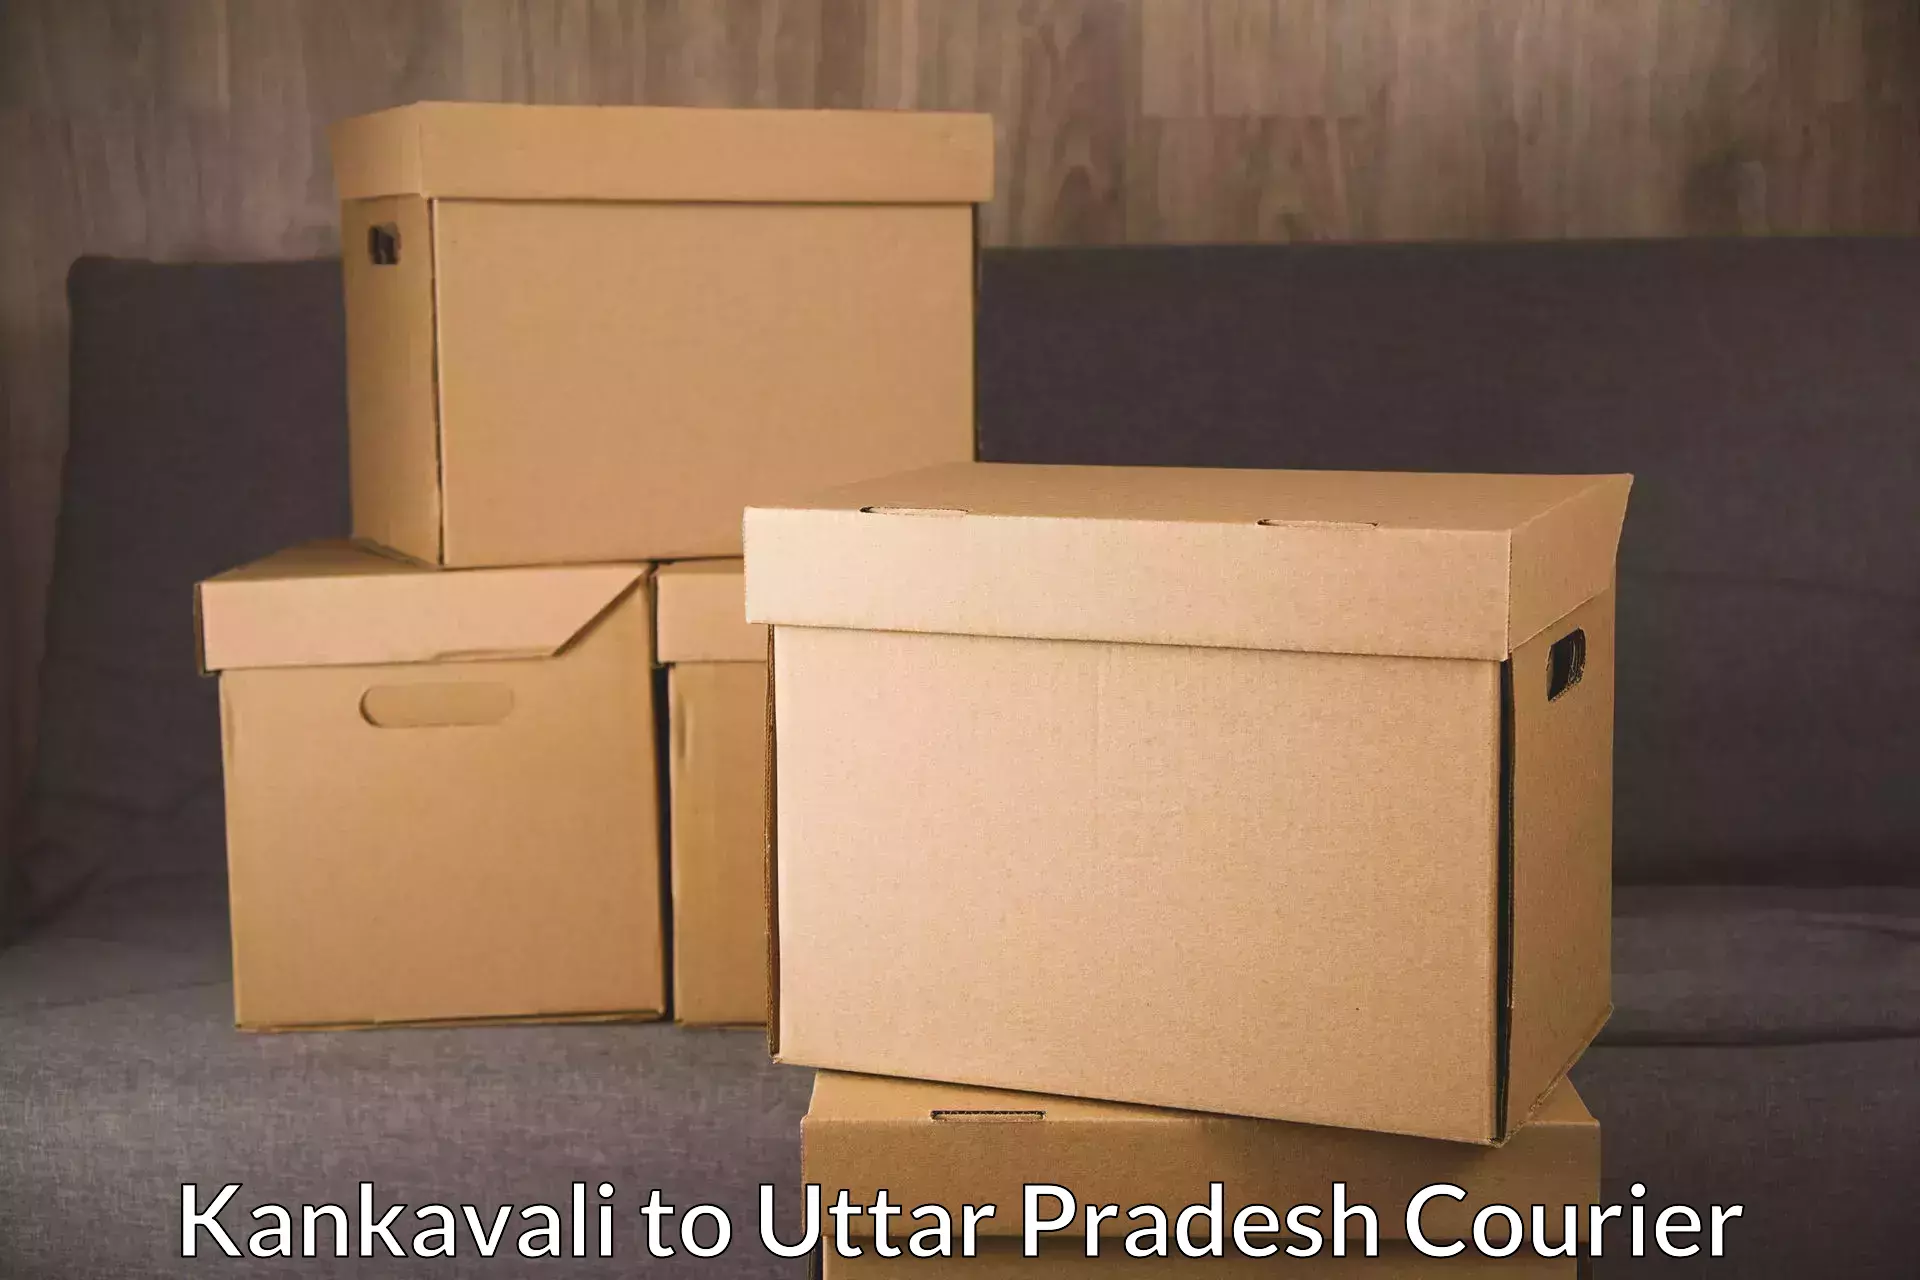 Same-day delivery options Kankavali to Noida